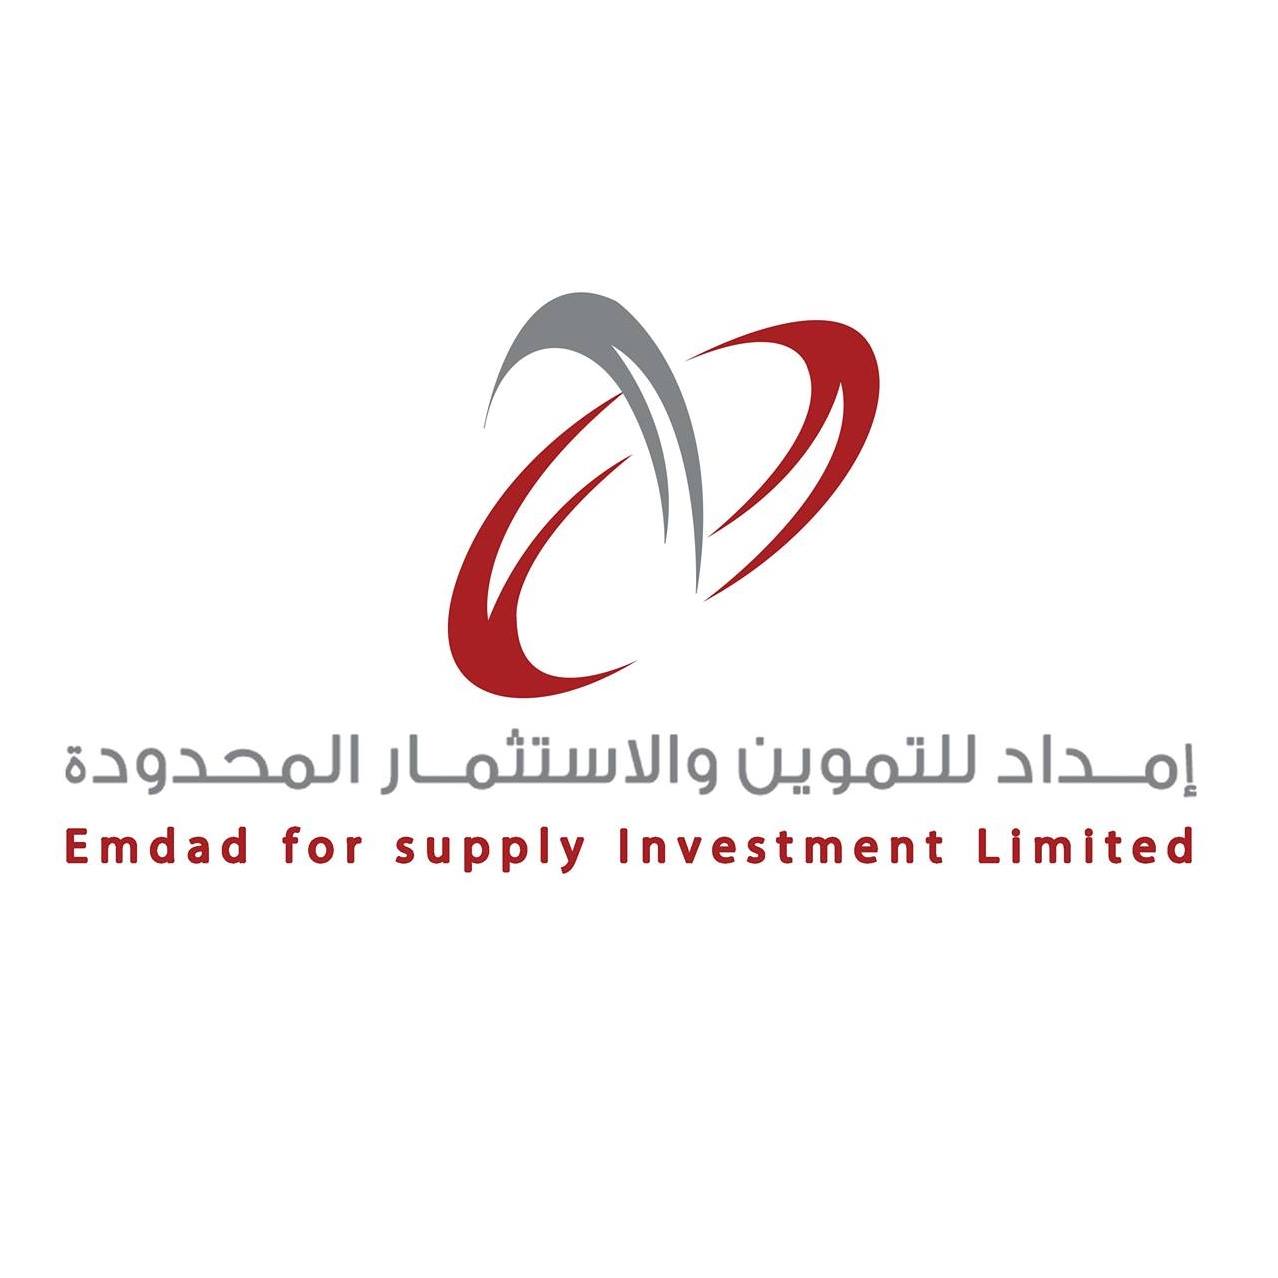 Emdad for supply Investment Limited